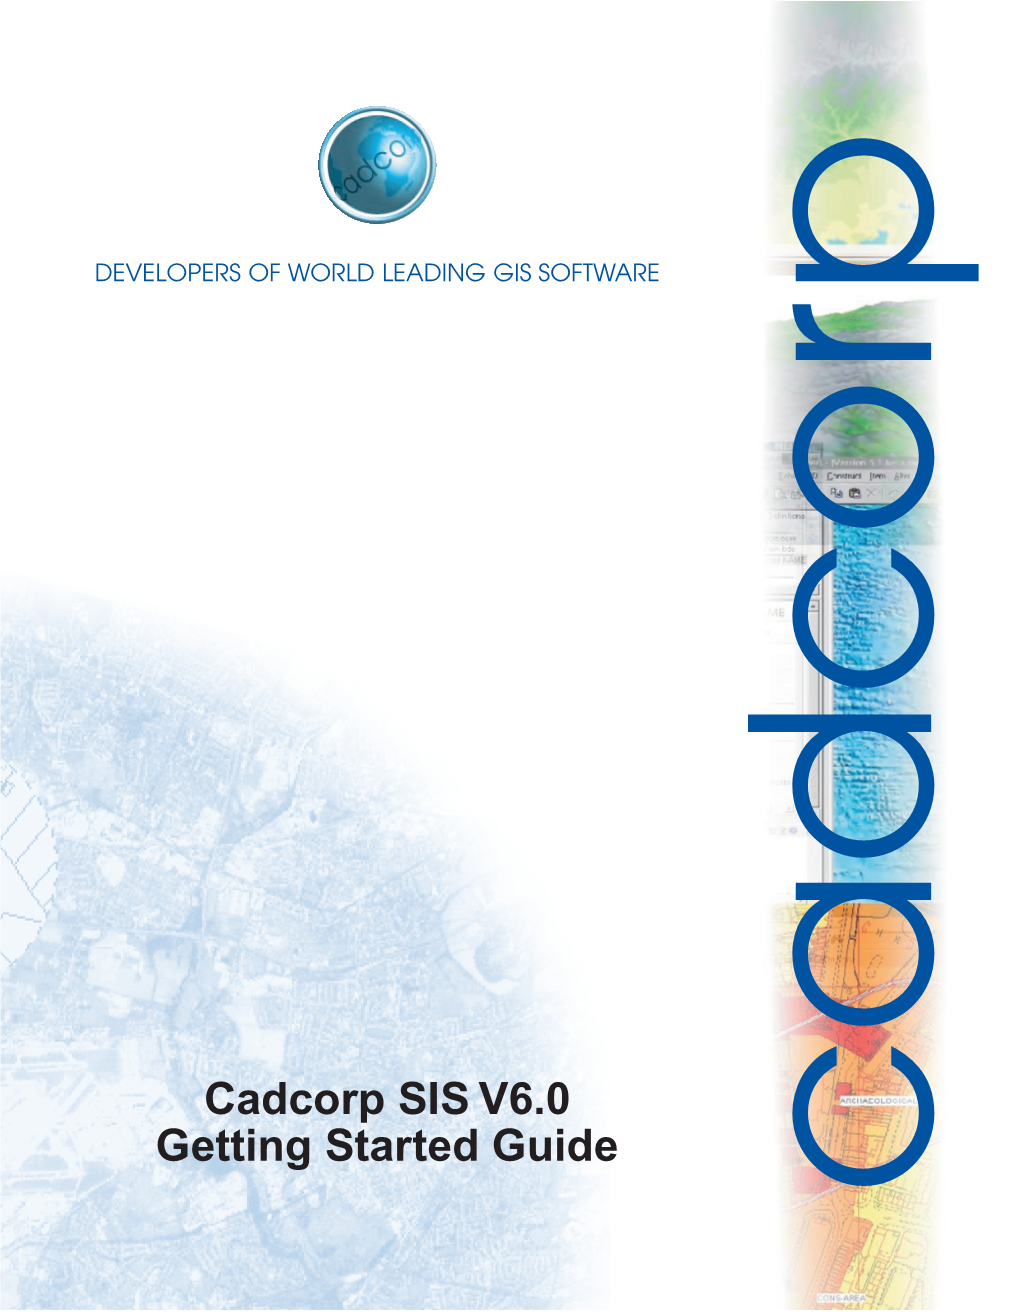 Cadcorp SIS V6.0 Getting Started Guide